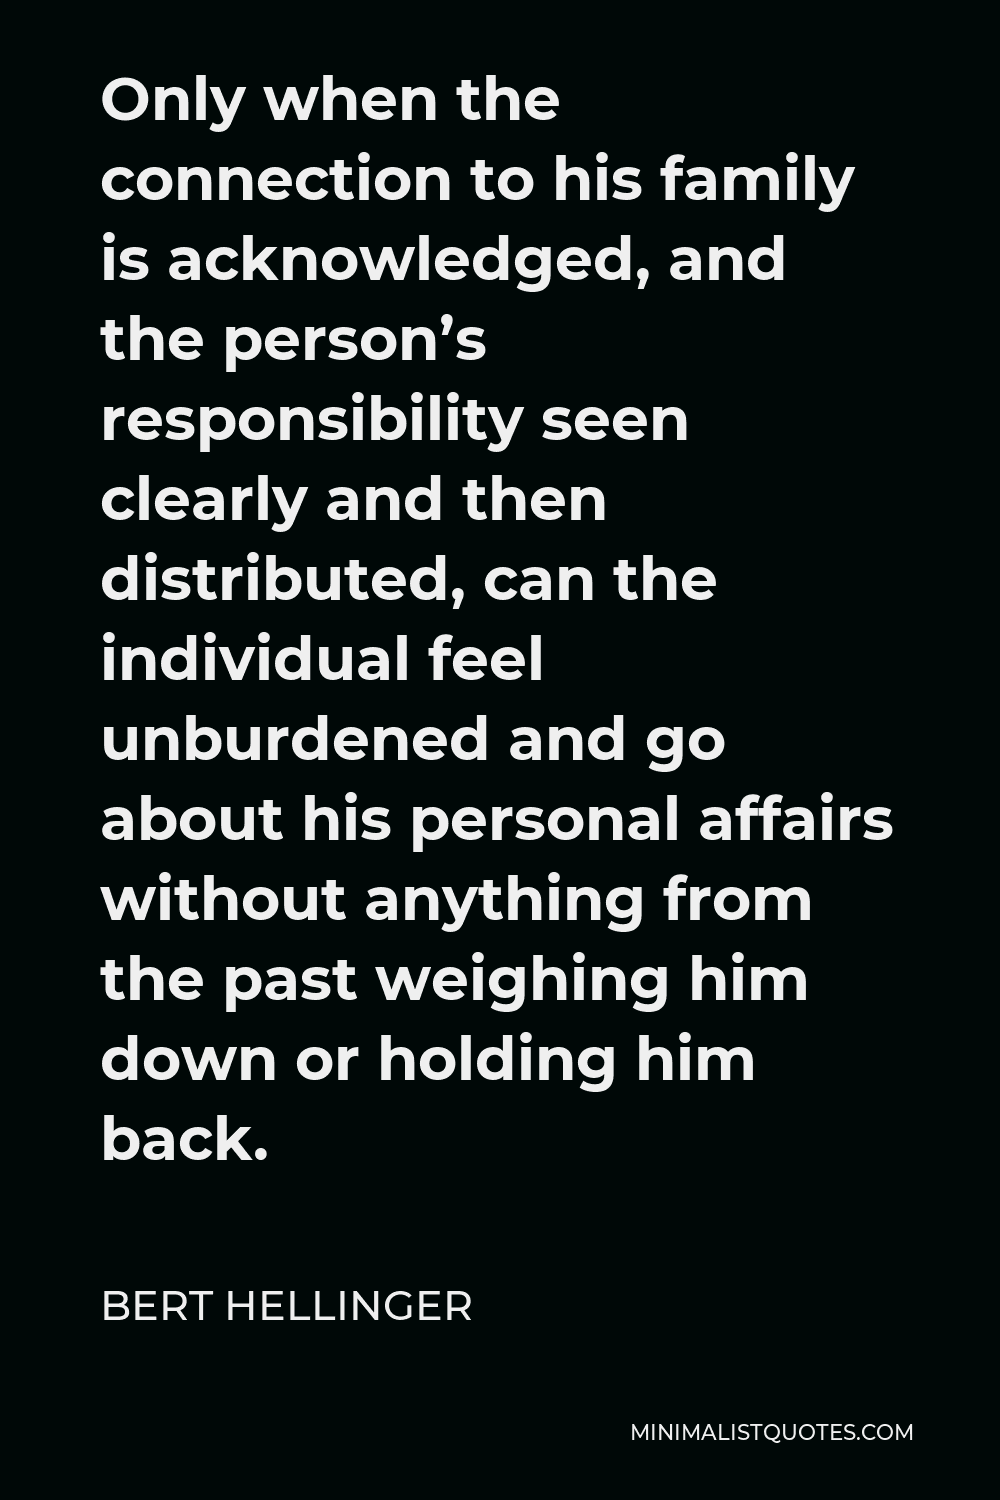 Bert Hellinger Quote - Only when the connection to his family is acknowledged, and the person’s responsibility seen clearly and then distributed, can the individual feel unburdened and go about his personal affairs without anything from the past weighing him down or holding him back.